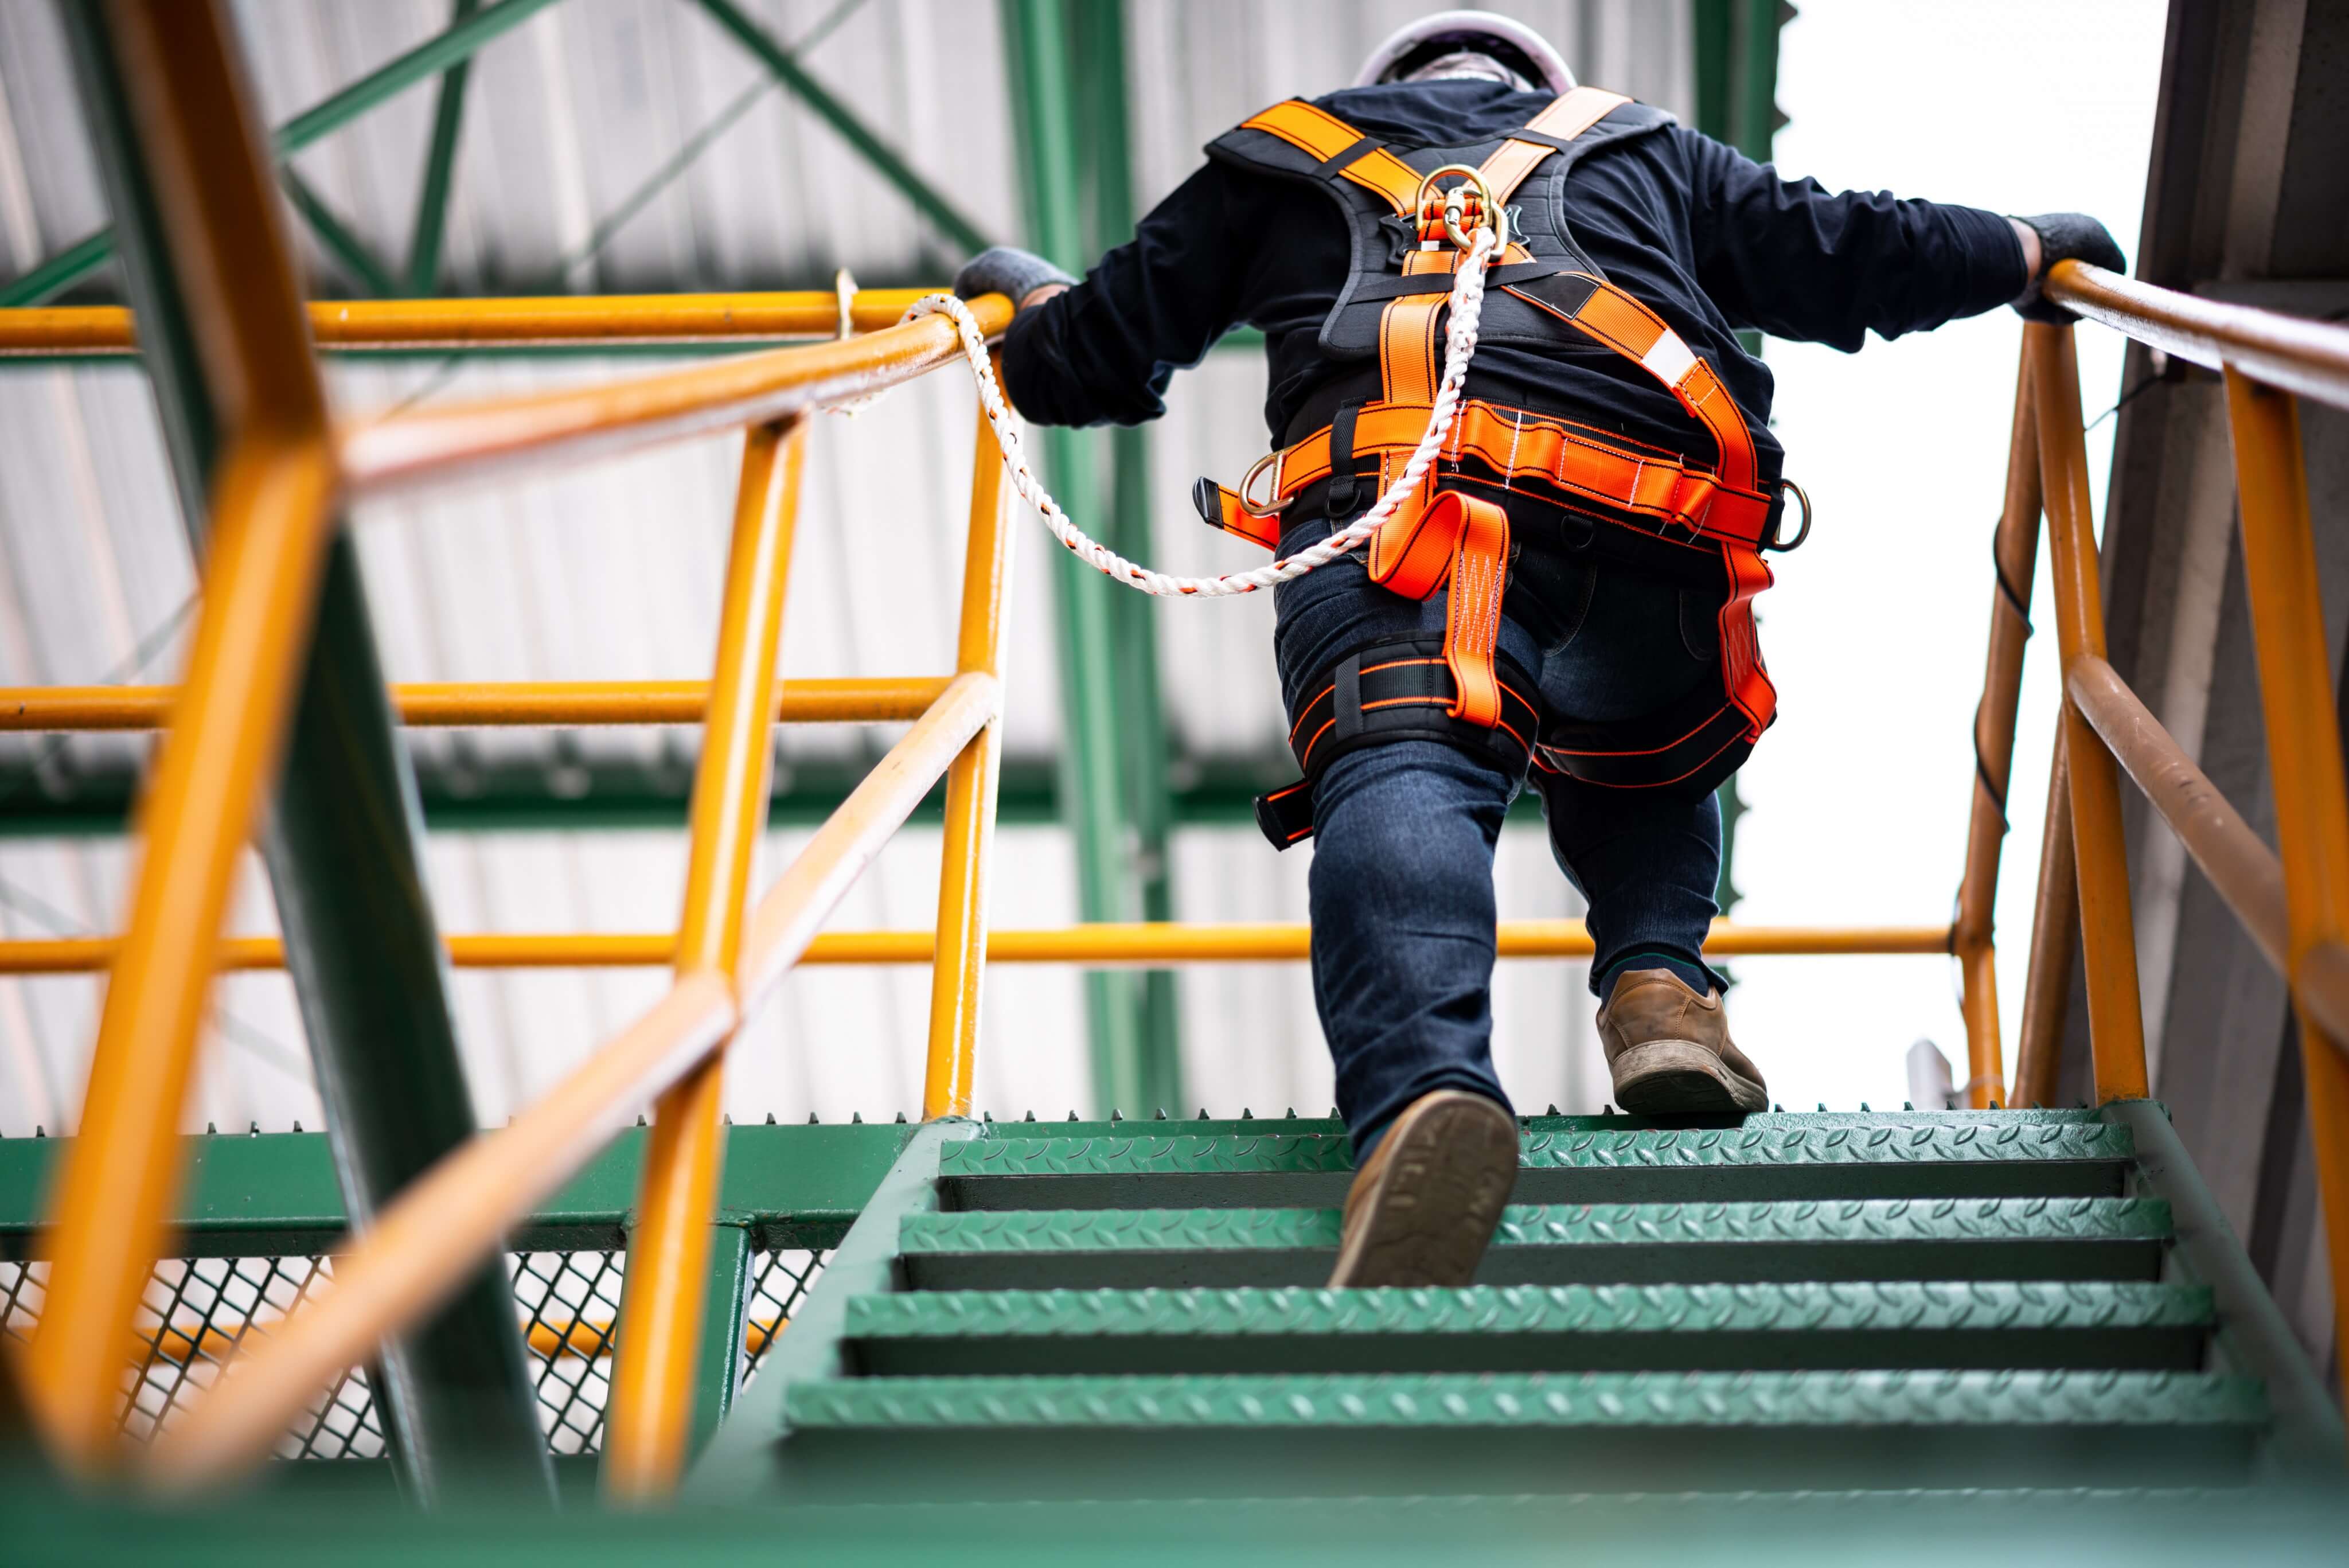 Ensure the Safety of Workers with Fall Protection and Confined Space Equipment Rentals